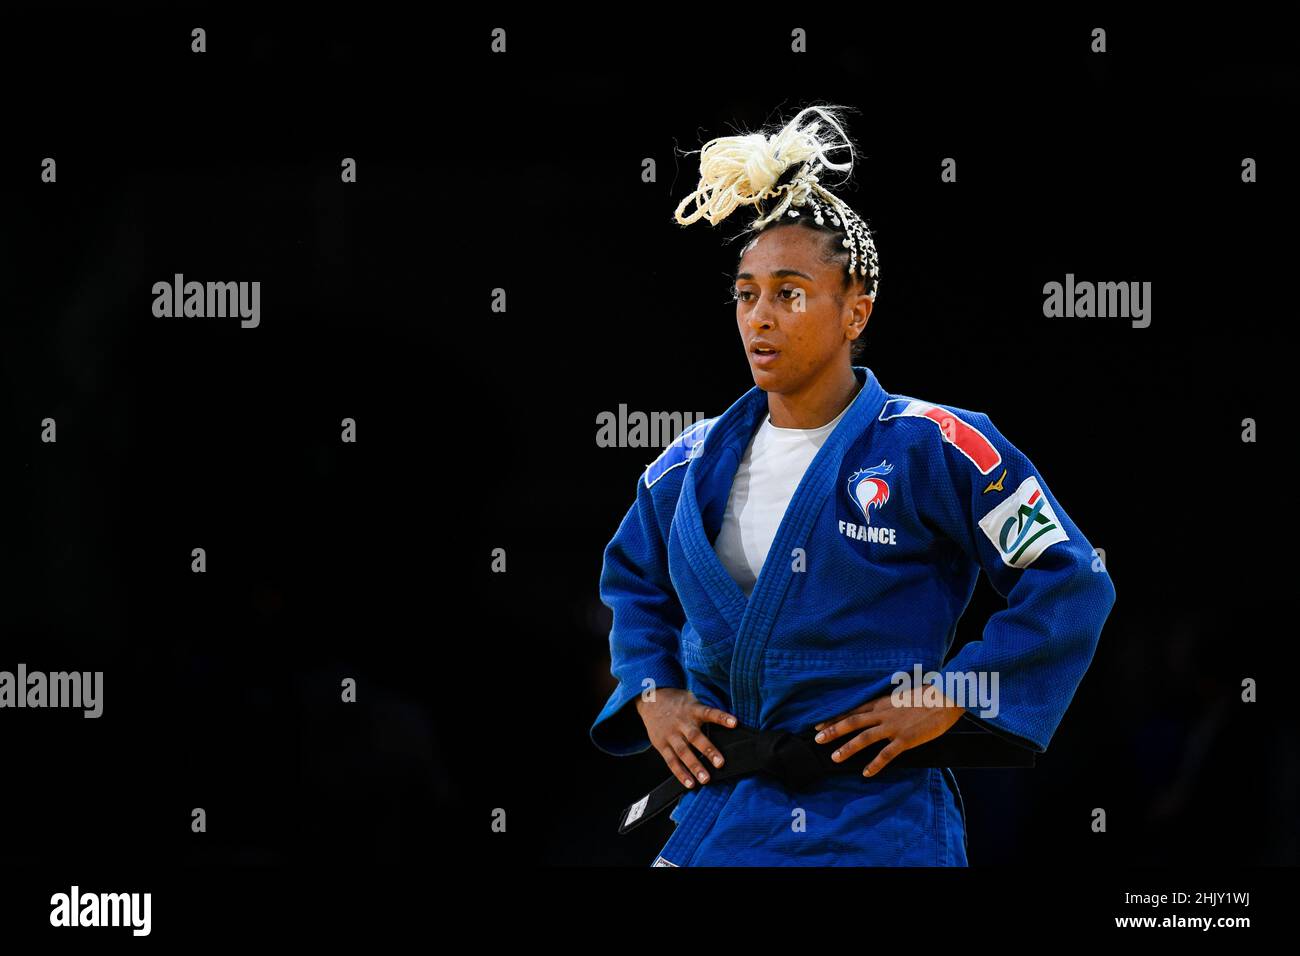 Women -57 kg, Martha Fawaz of France competes during the Paris Grand Slam 2021, Judo event on October 16, 2021 at AccorHotels Arena in Paris, France - Stock Photo